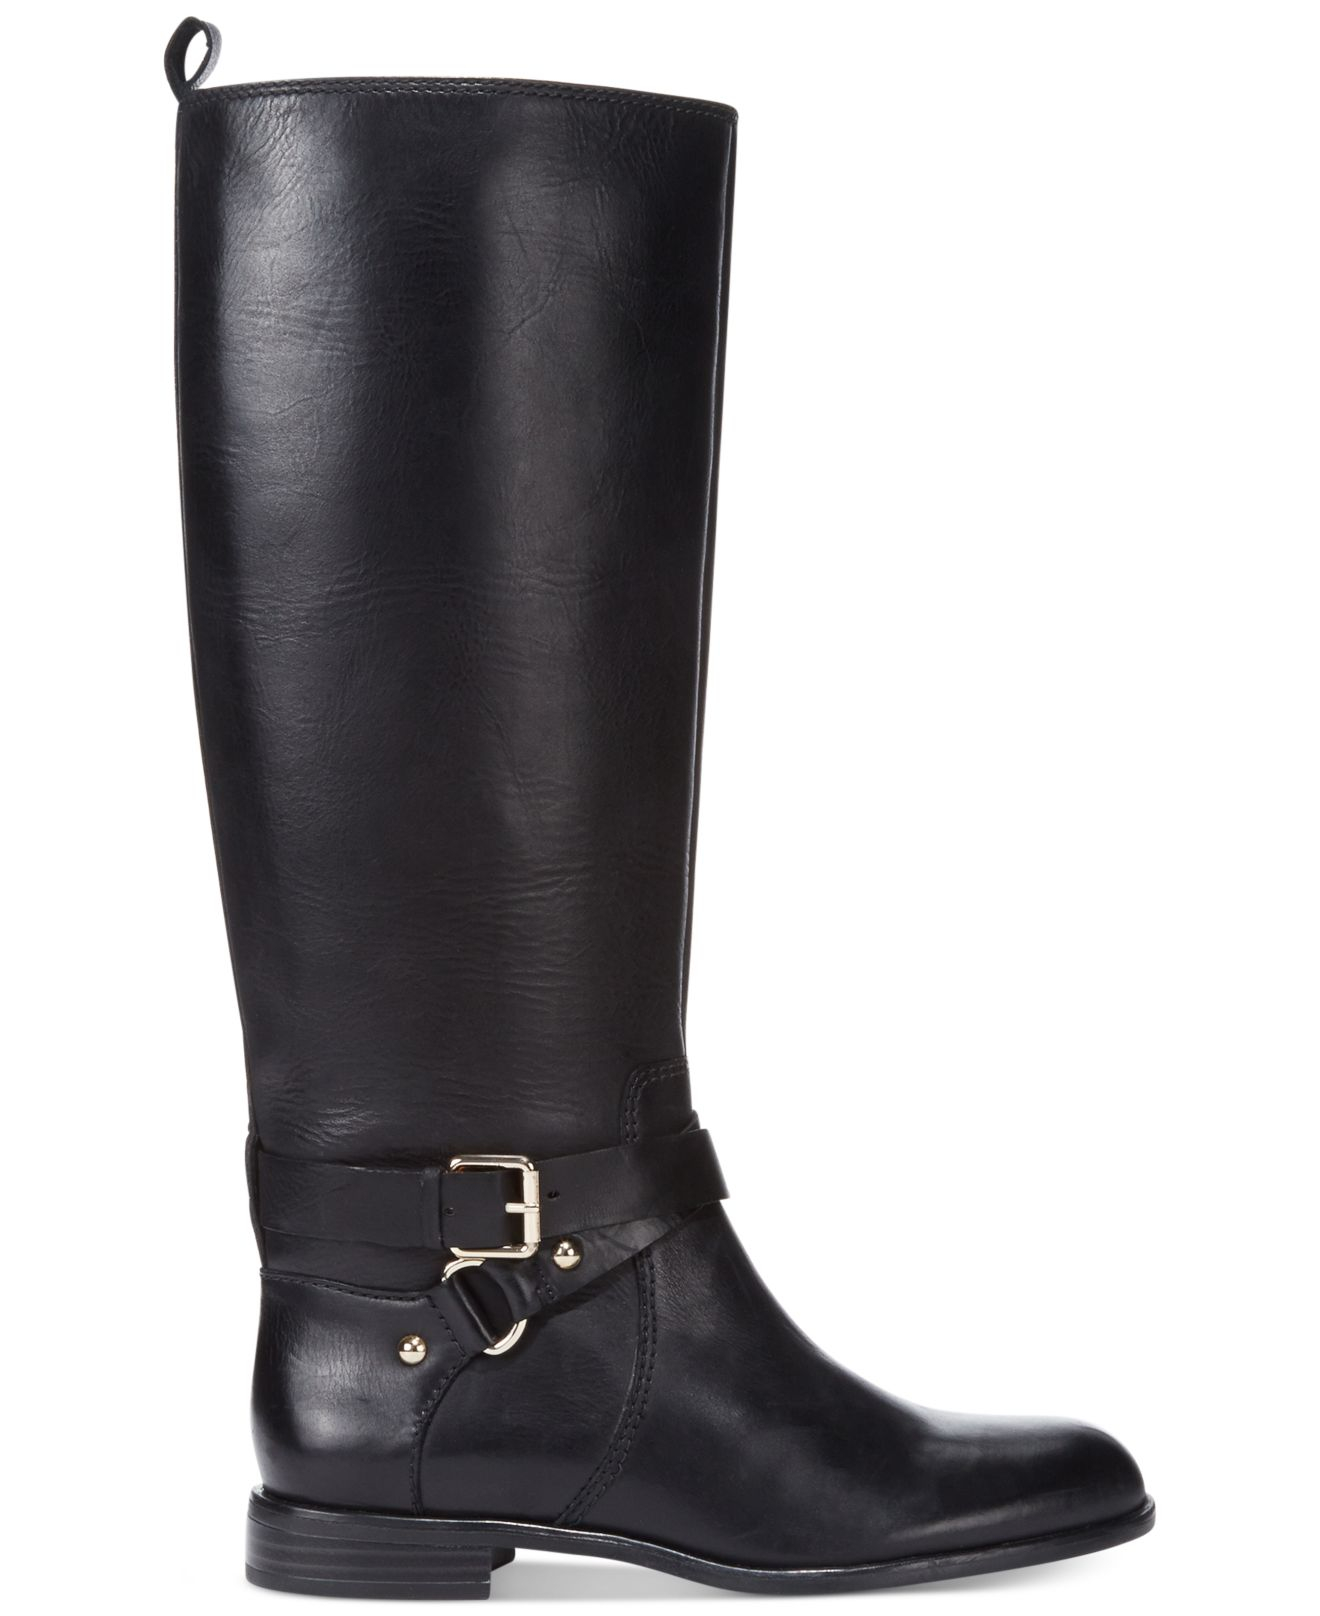 Enzo Angiolini Leather Daniana Wide Calf Riding Boots in Black - Lyst